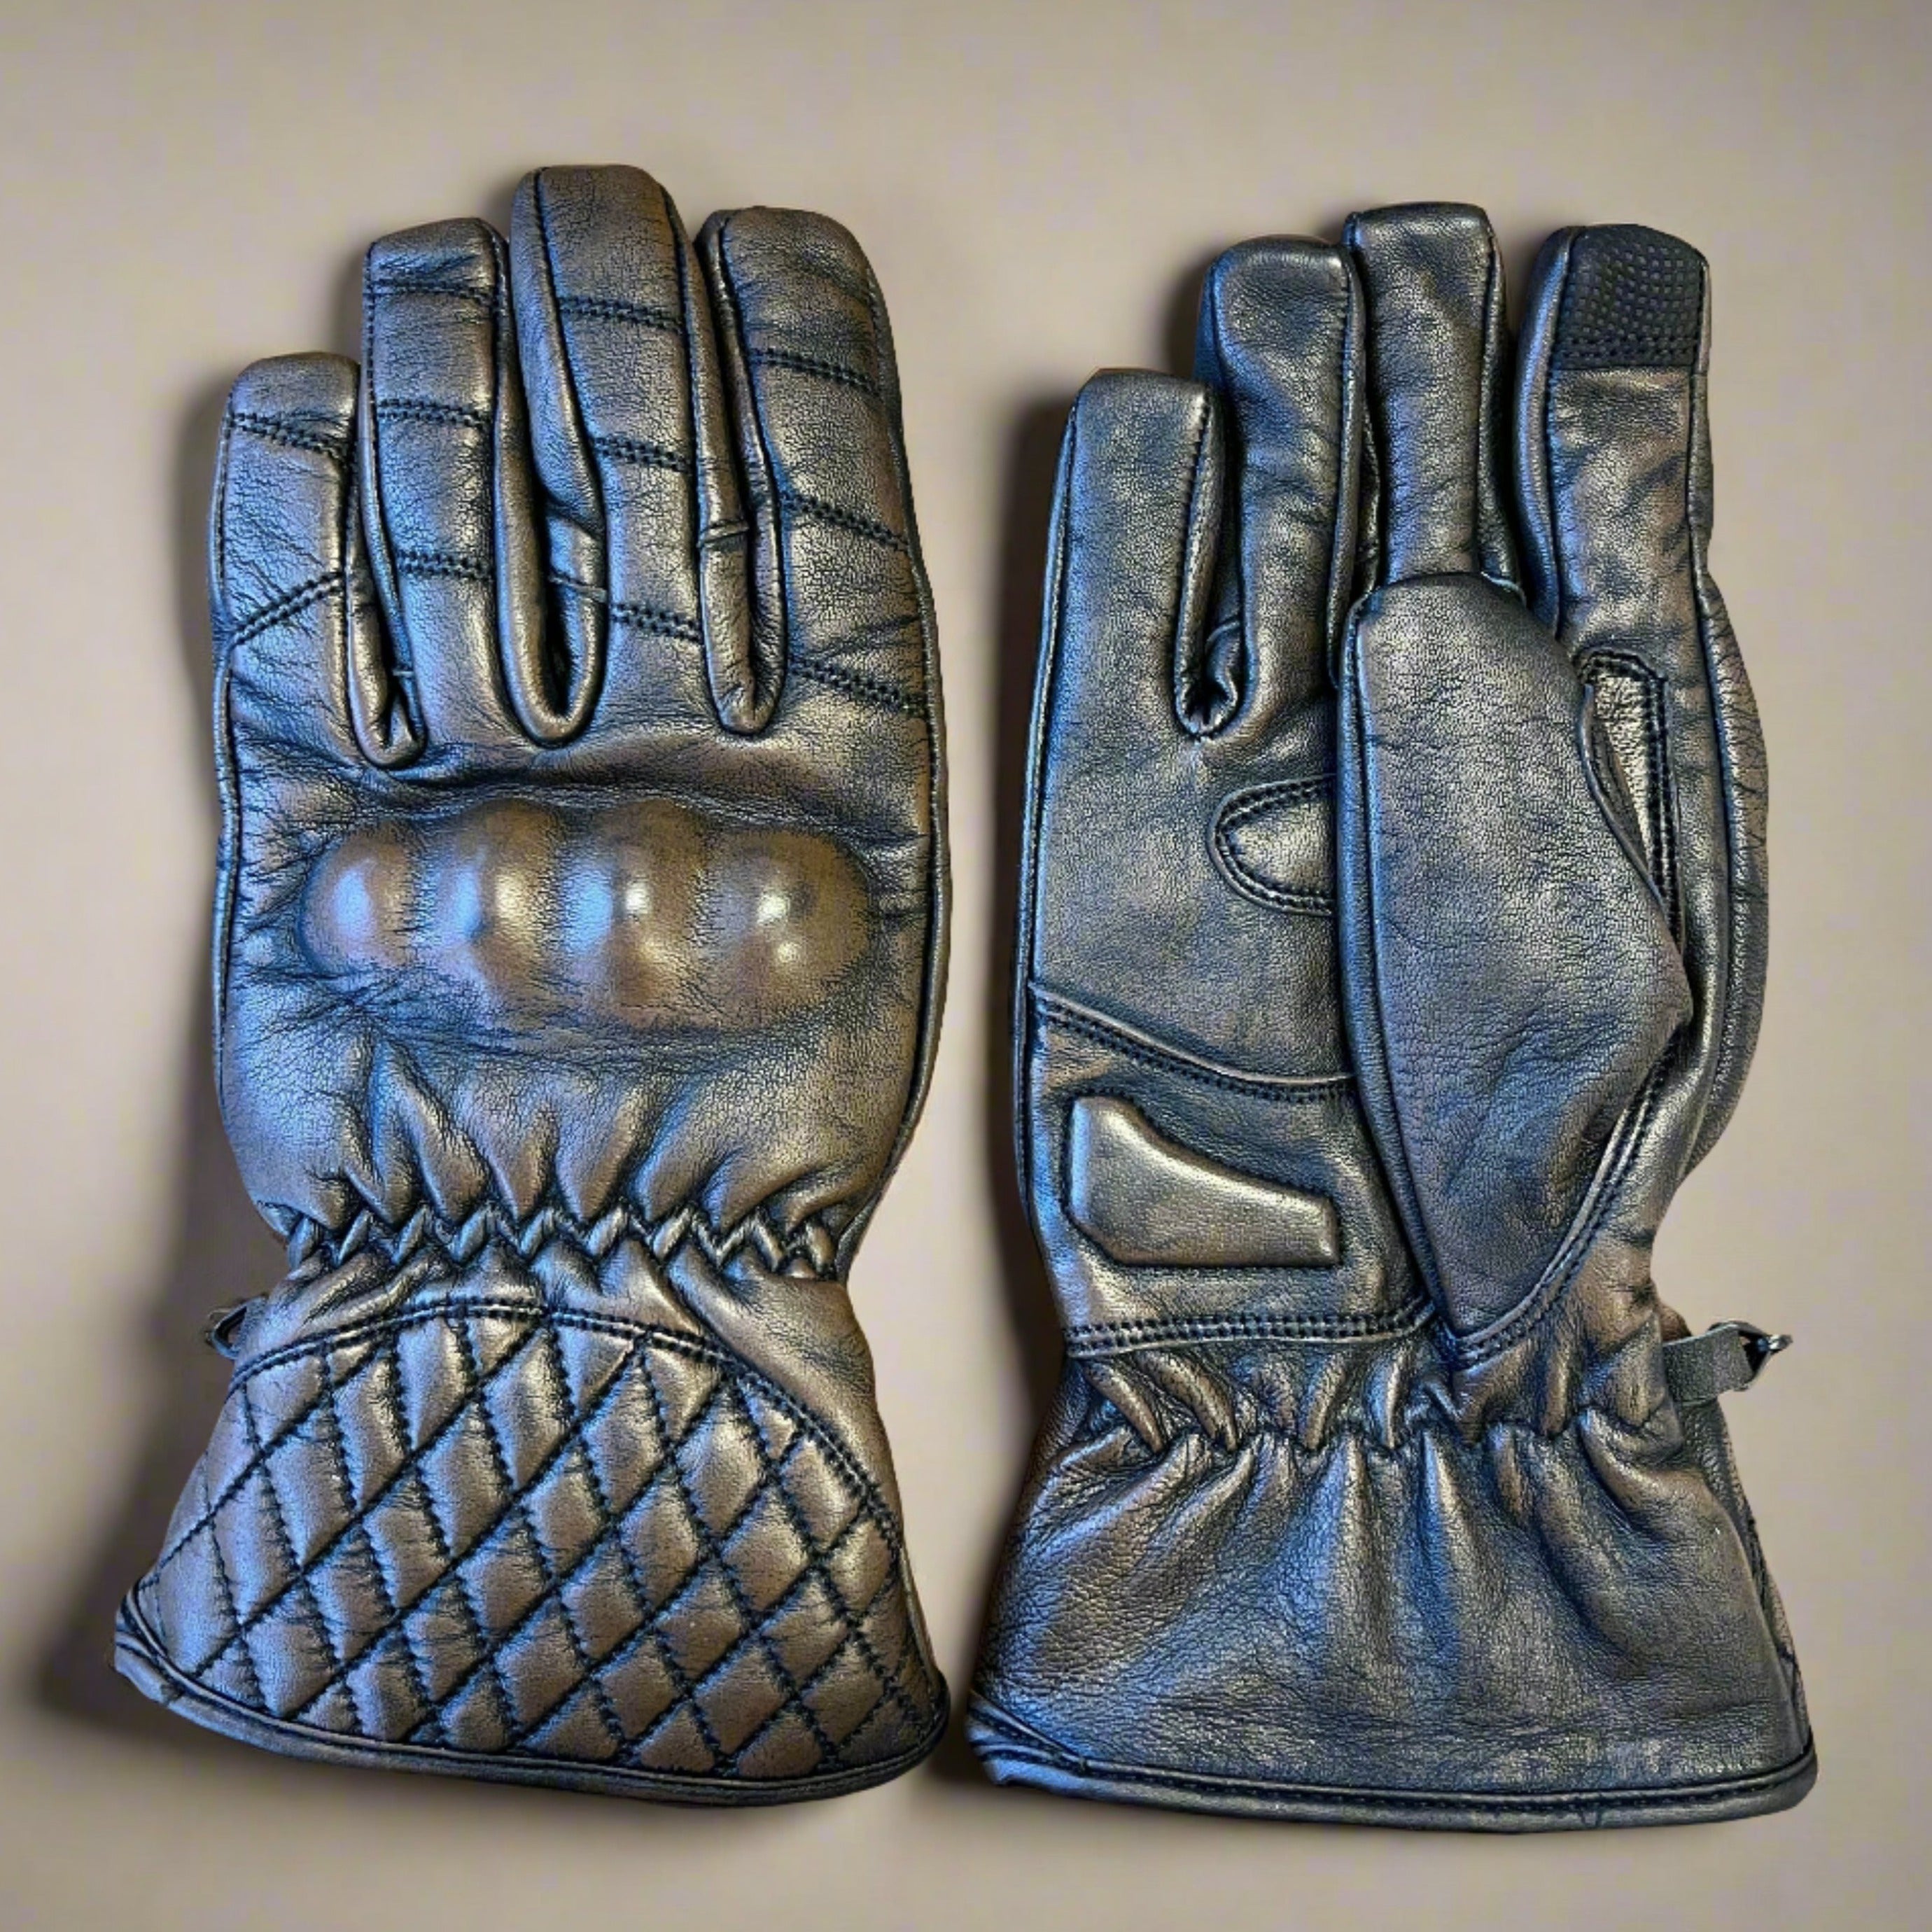 Hard Knuckle Leather Motorcycle Gloves - Boutique of Leathers/Open Road